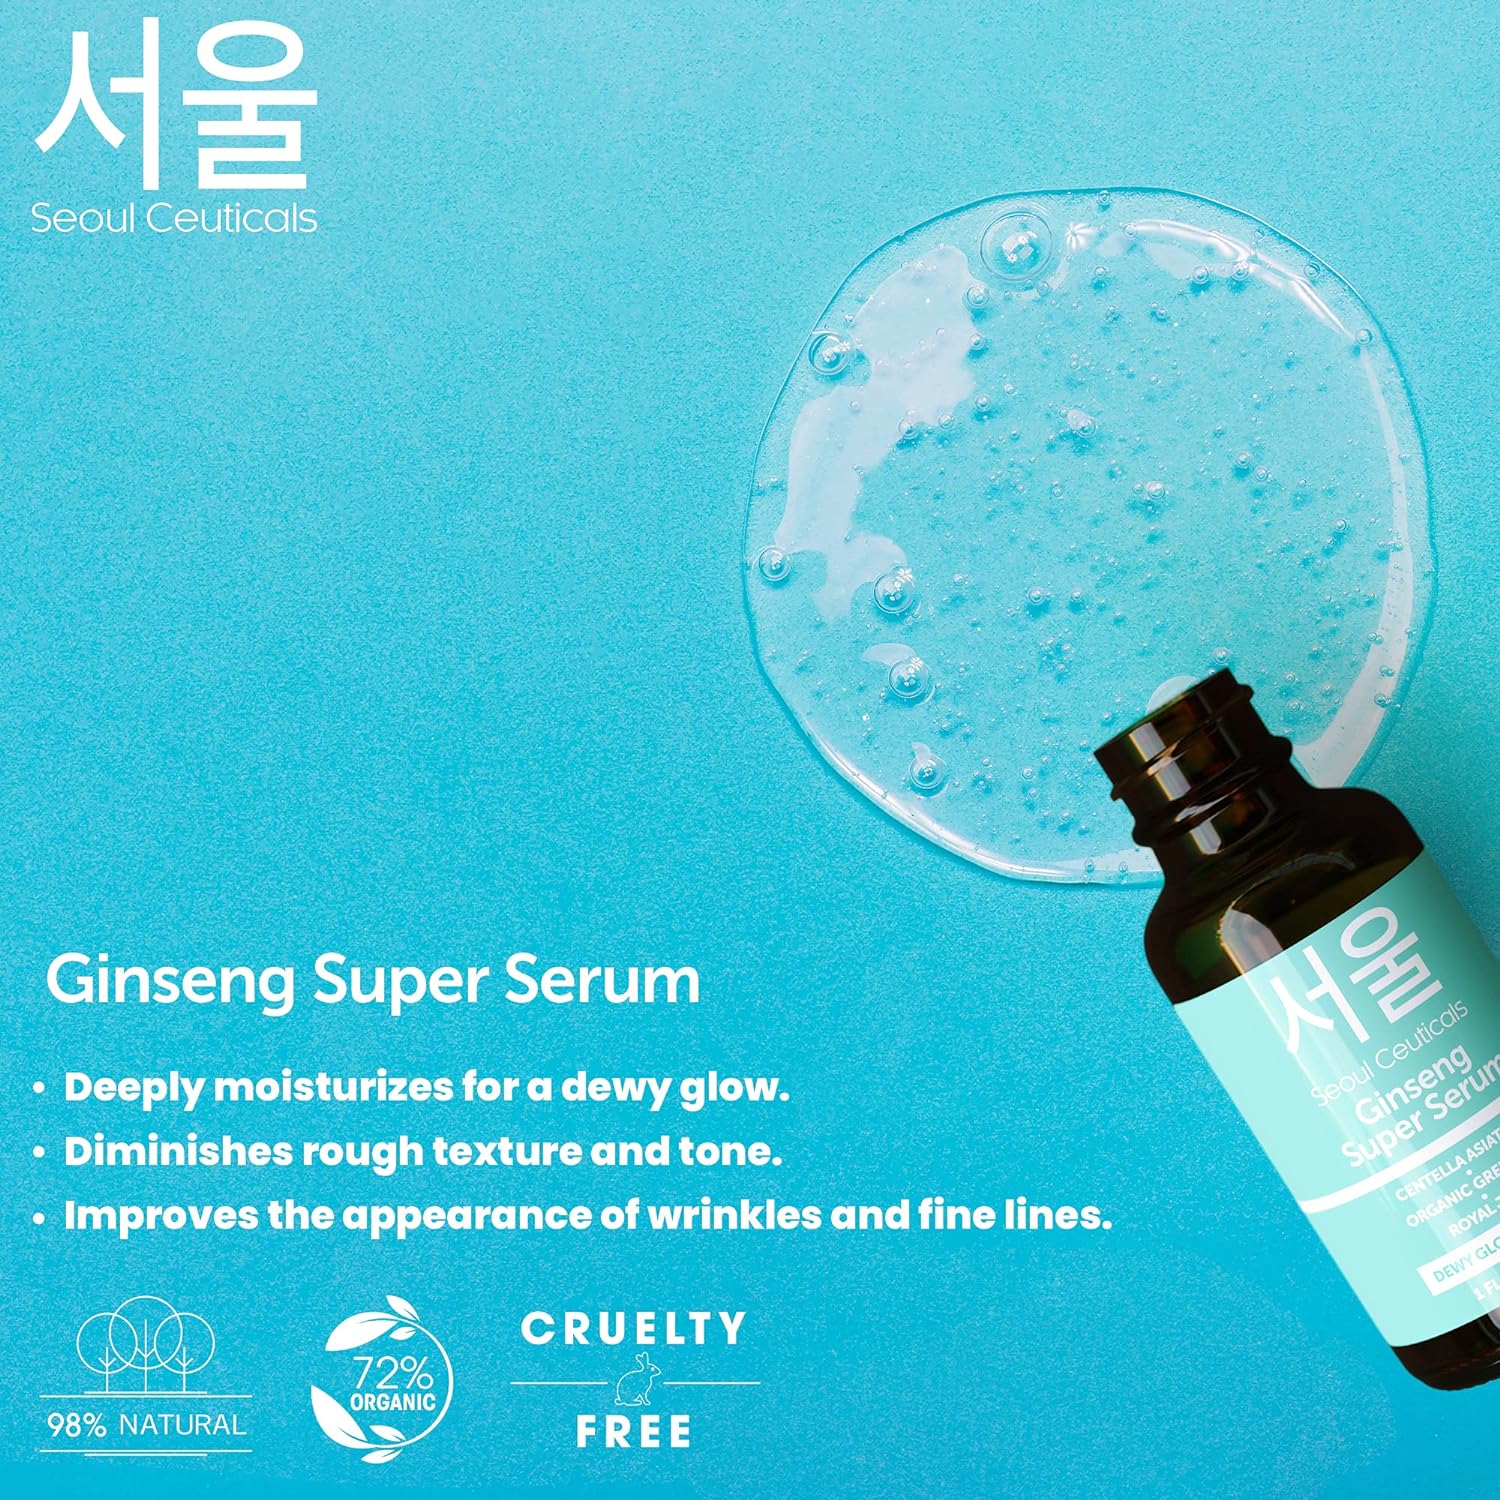 SeoulCeuticals Korean Skin Care Ginseng Serum - K Beauty Skincare with Green Tea + Centella + Royal Jelly - Cruelty Free  Organic for Glass Skin 1oz